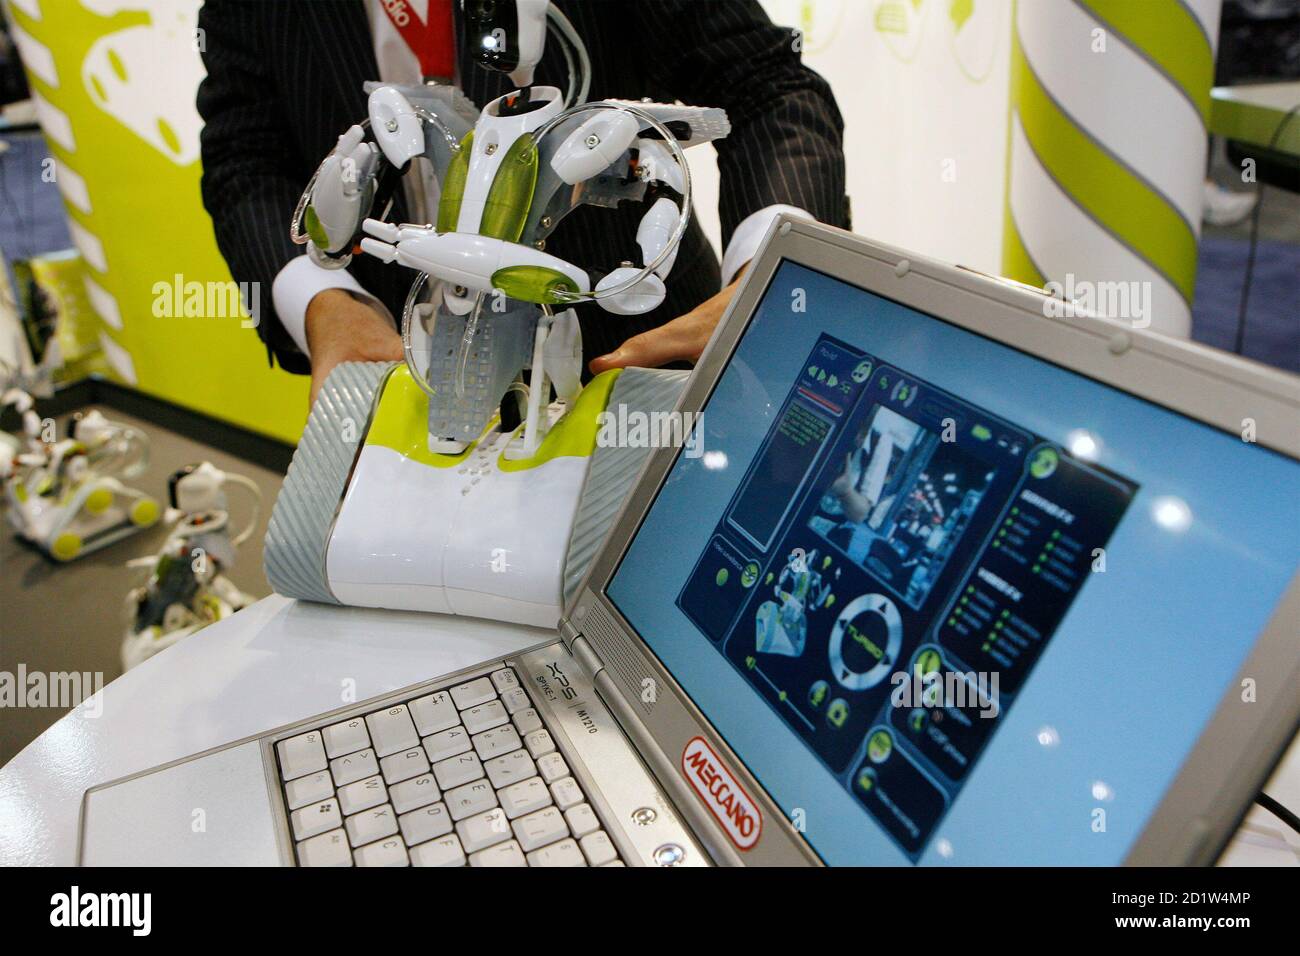 An Erector company representative picks up a "Spykee" robot (L) which is  controlled over a WiFi internet connection during the DigitalLife consumer  electronics show in New York September 27, 2007. REUTERS/Lucas Jackson (